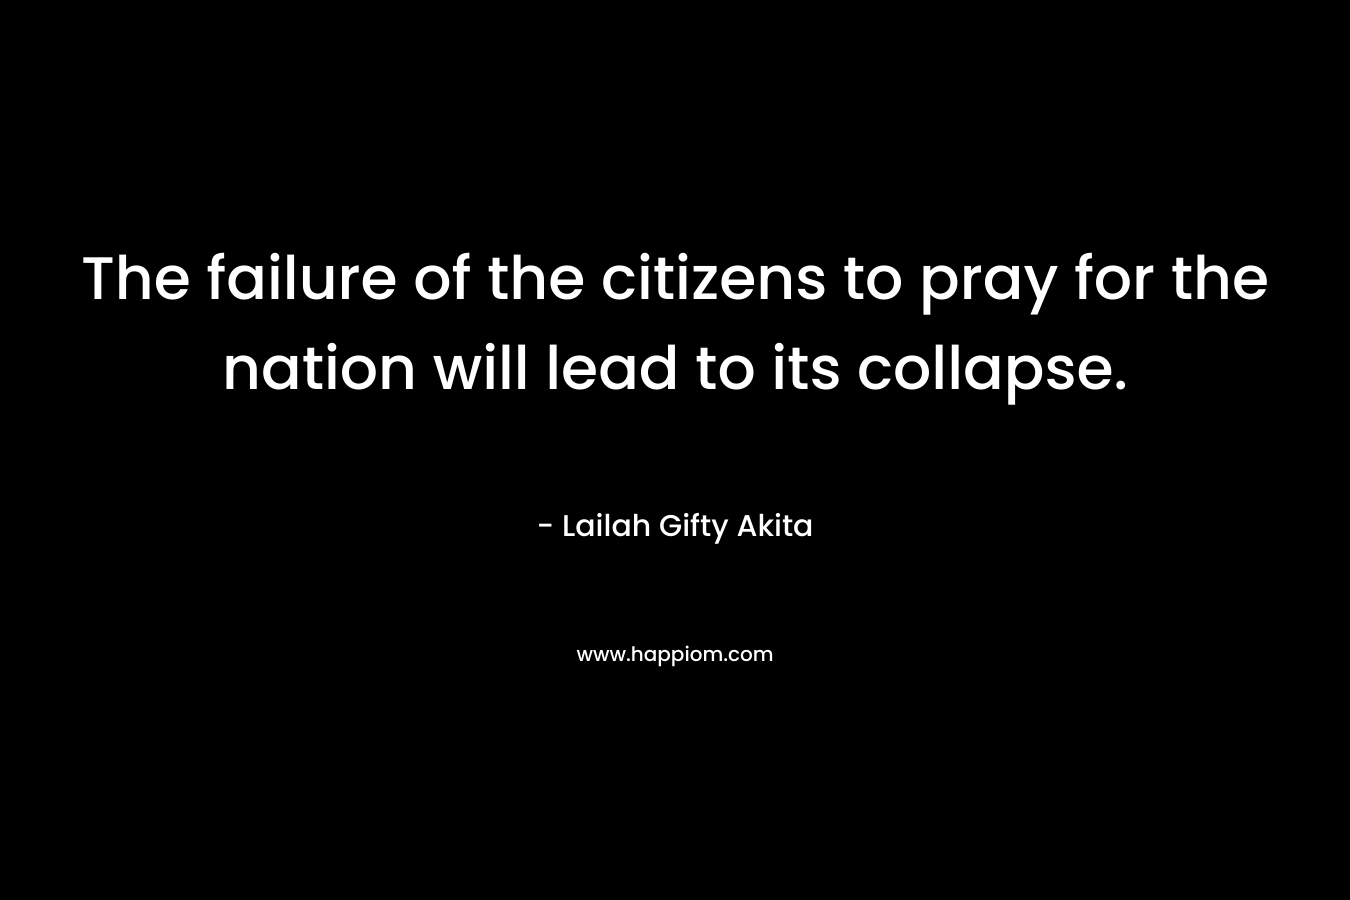 The failure of the citizens to pray for the nation will lead to its collapse. – Lailah Gifty Akita